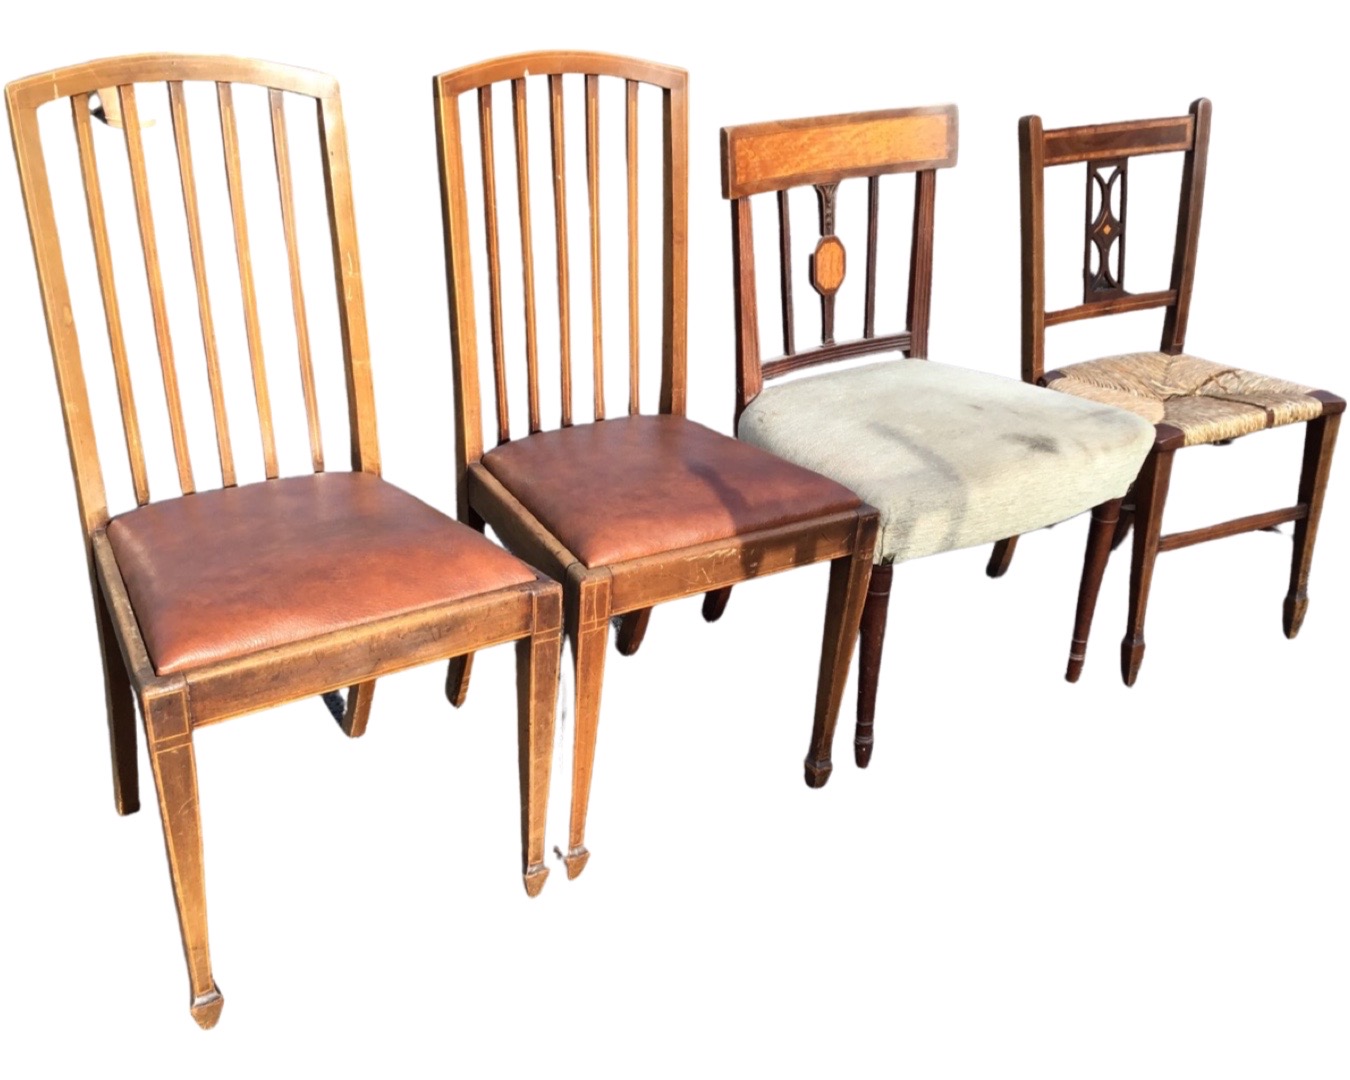 A pair of Edwardian boxwood inlaid mahogany chairs with arched spindlebacks above drop-in